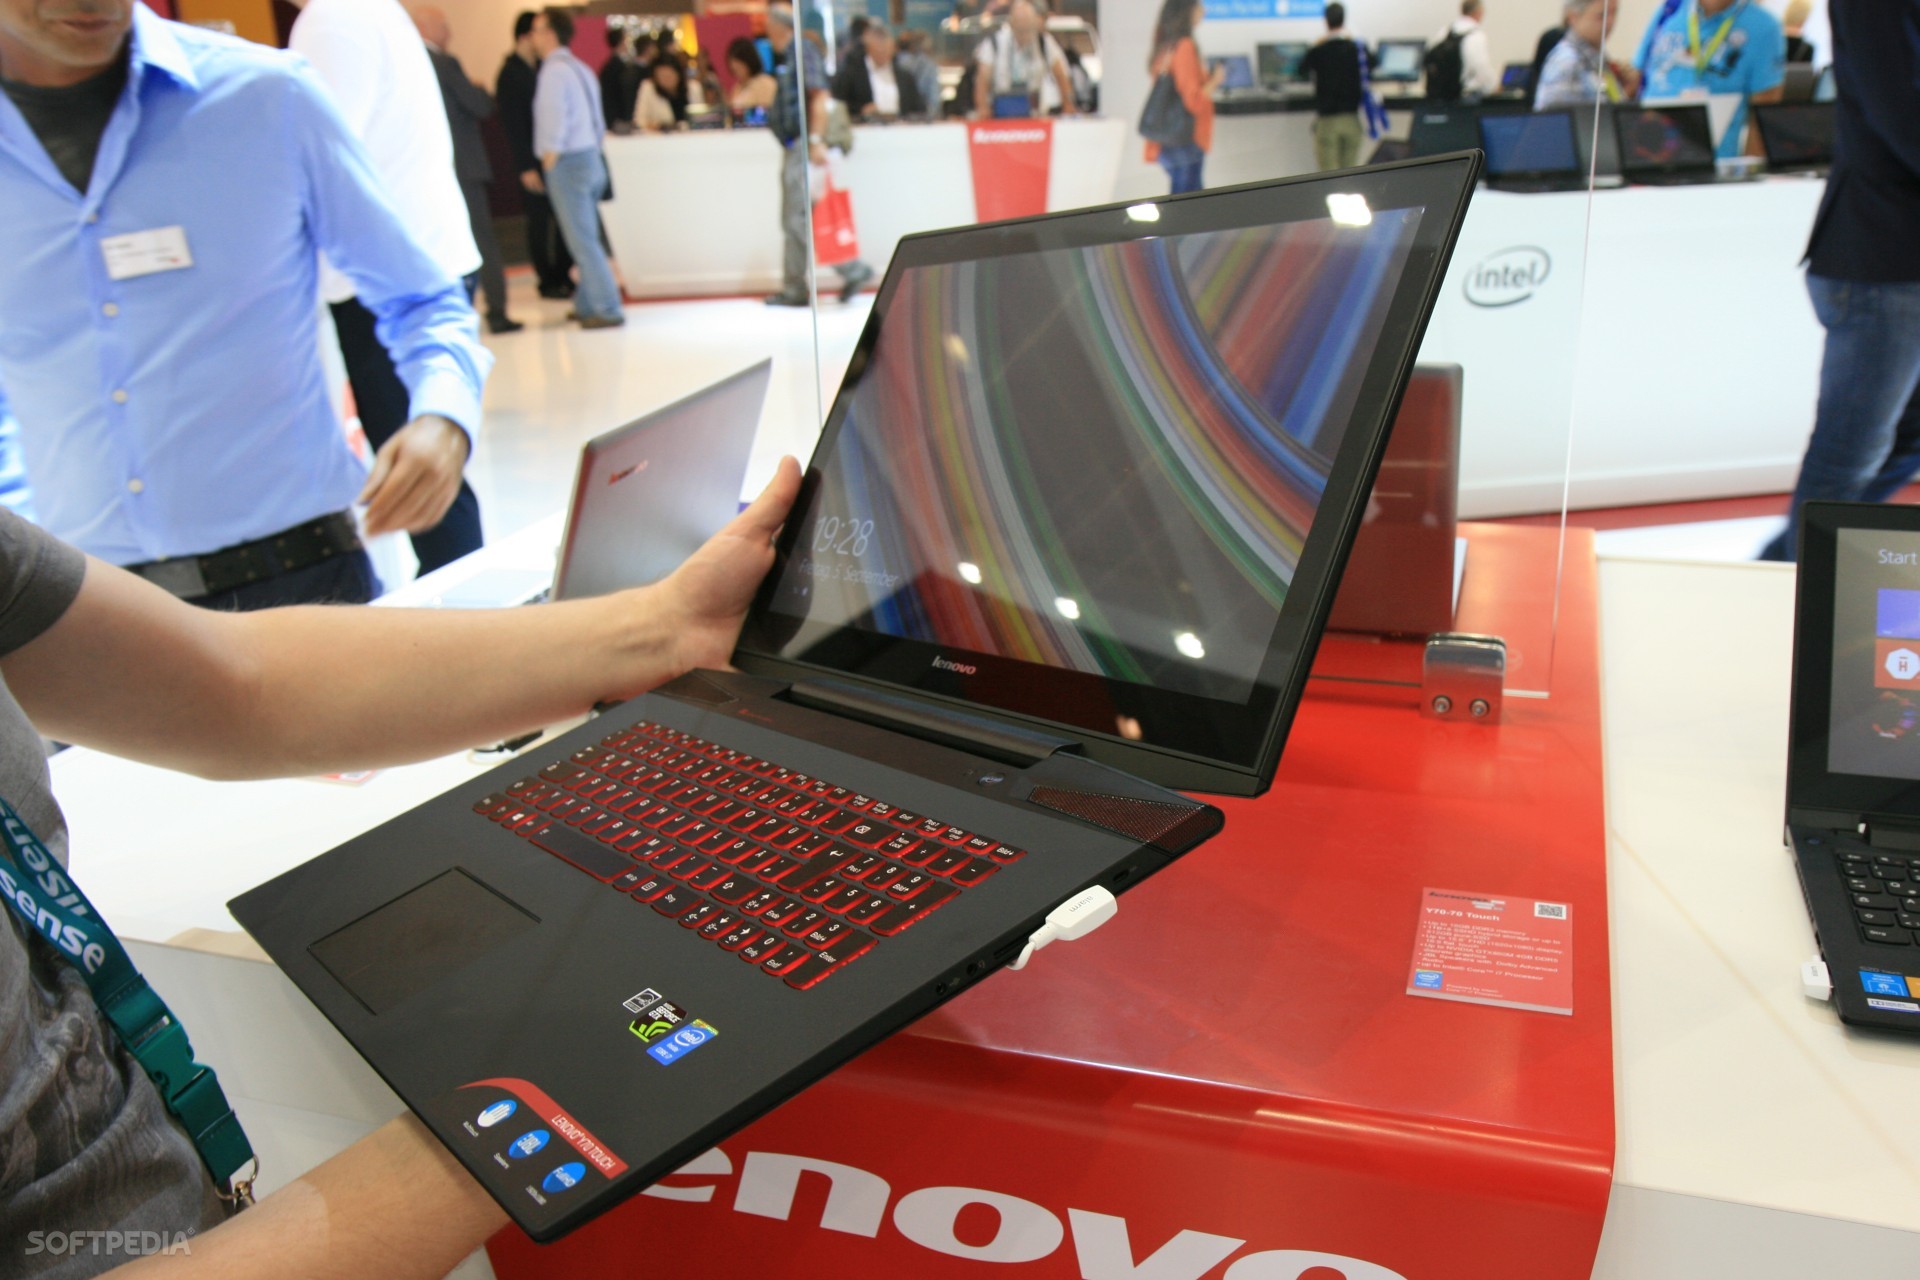 HandsOn Lenovo IdeaPad Y70 Gaming Laptop with Touch Screen